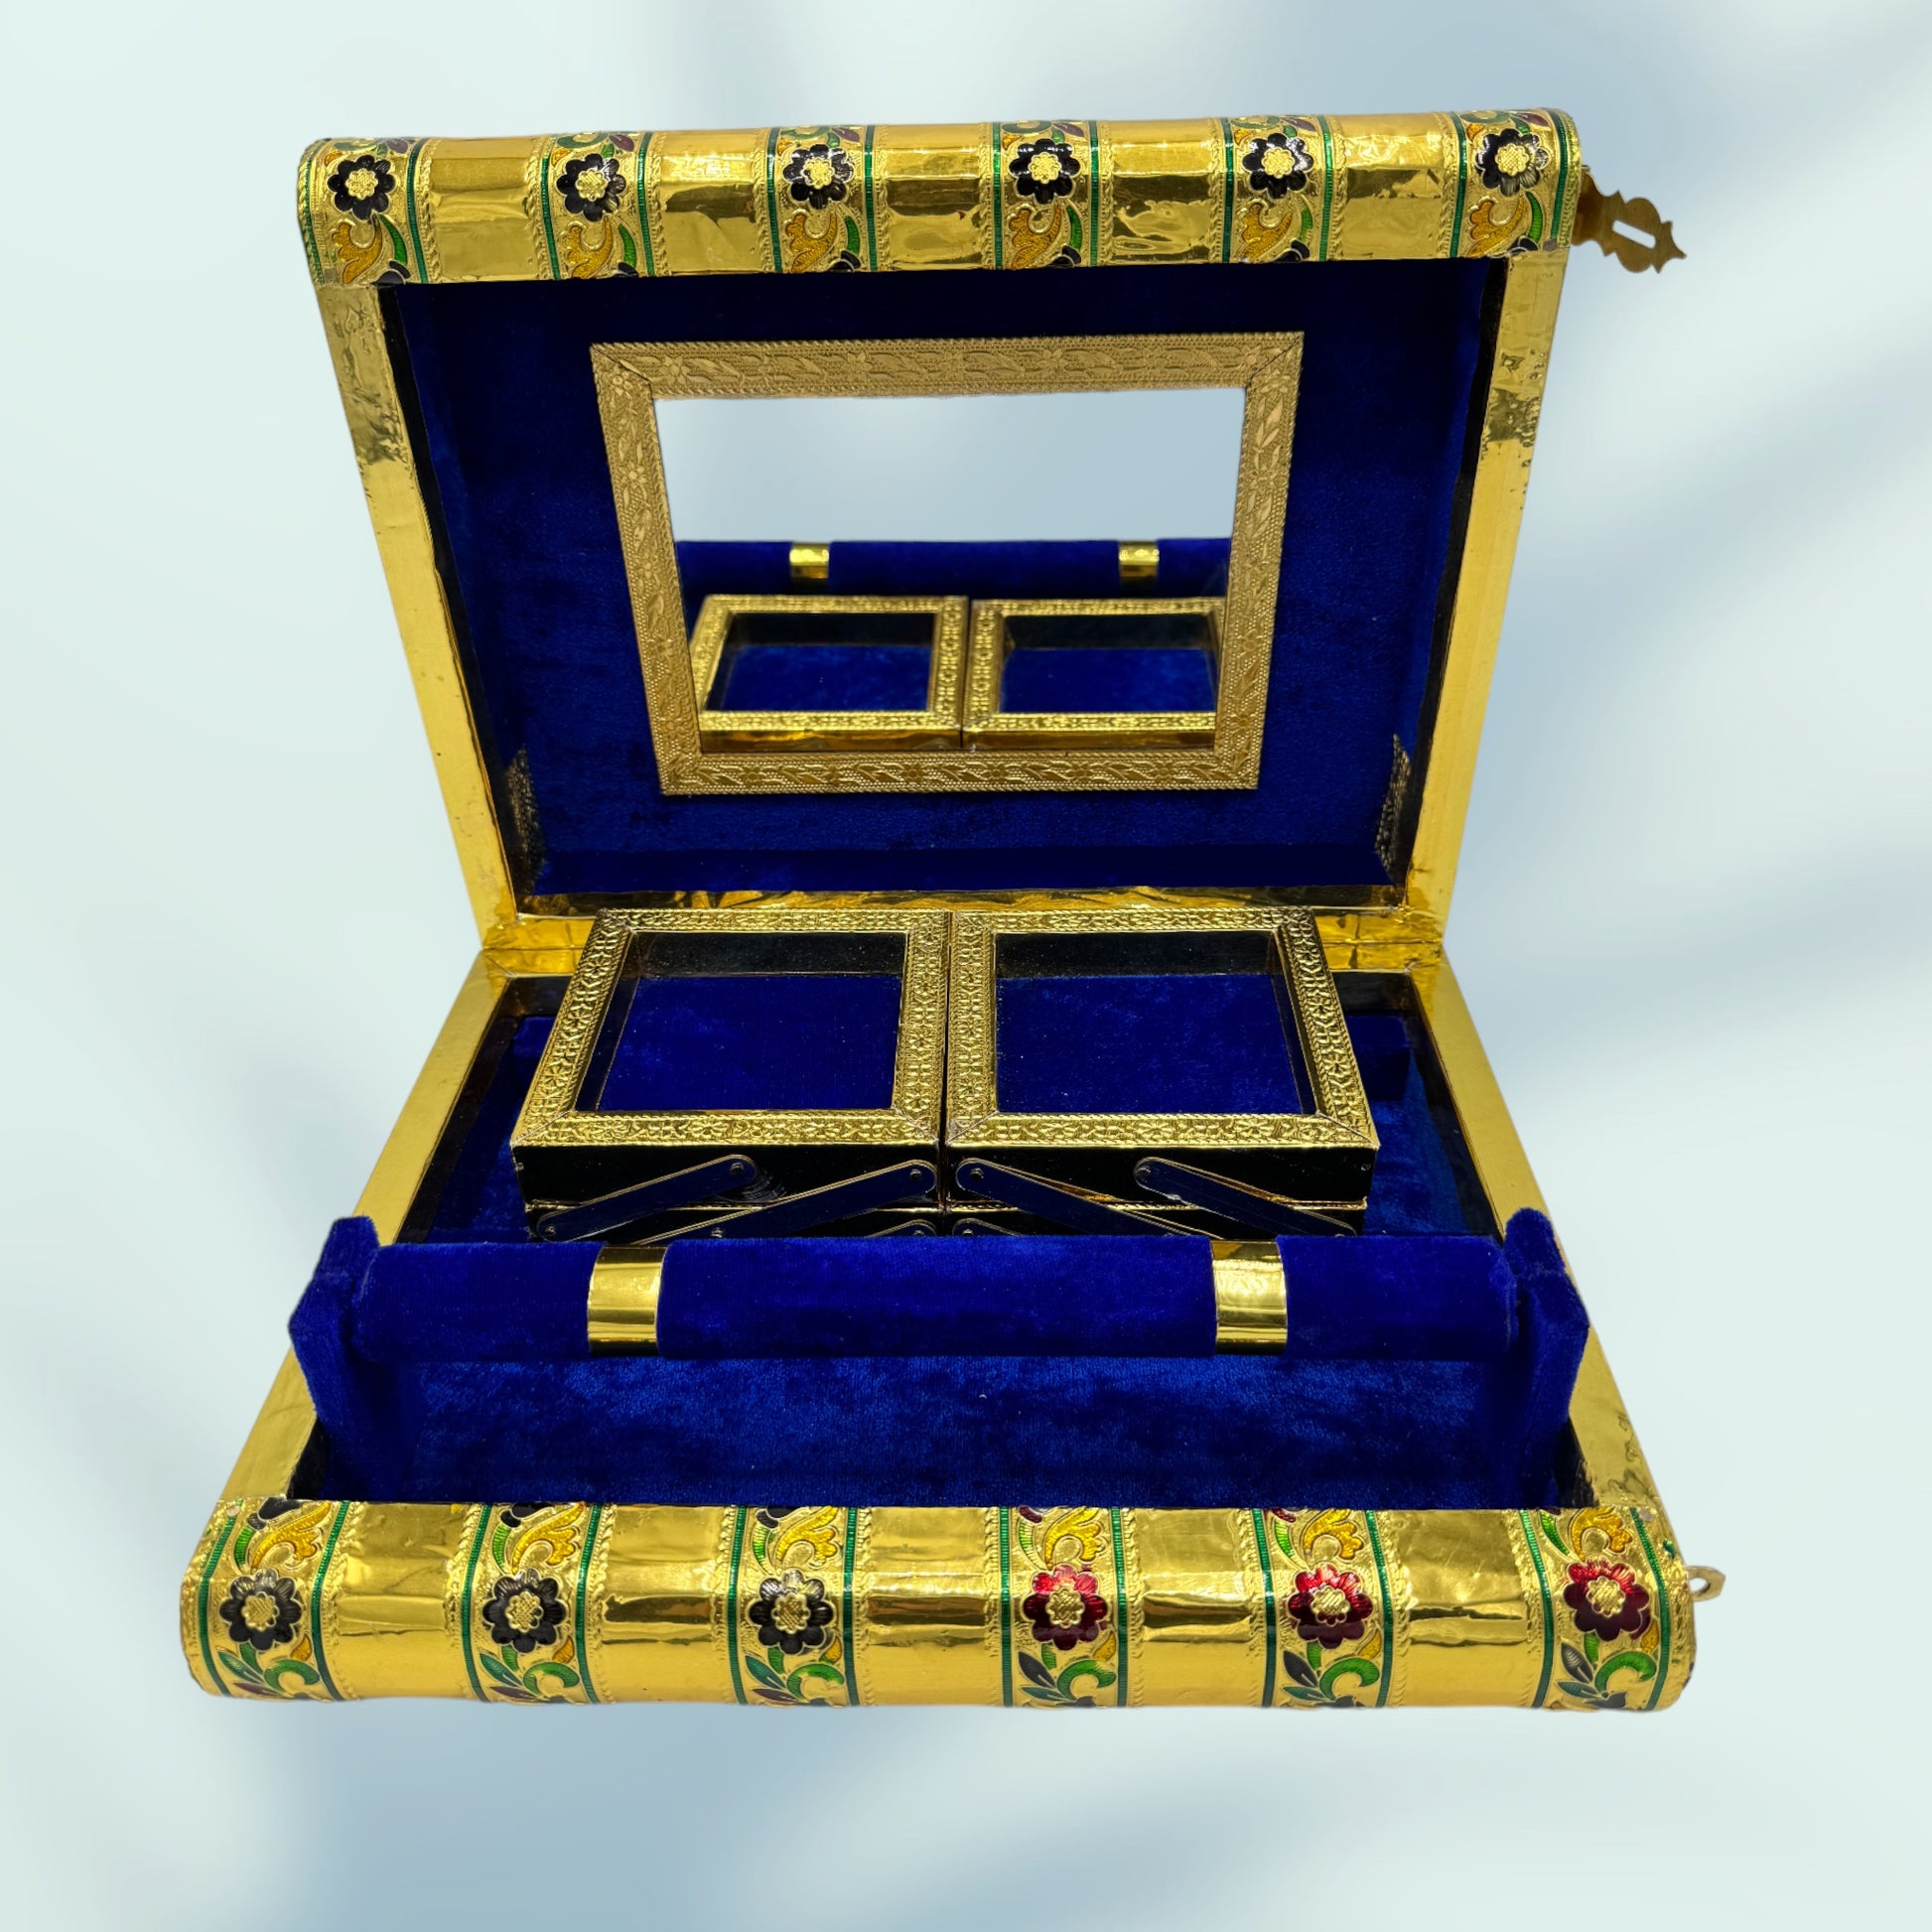 open peacock jewelry box with the dowel in place and the trays folded down. there is a framed mirror and a latch seen on the top 